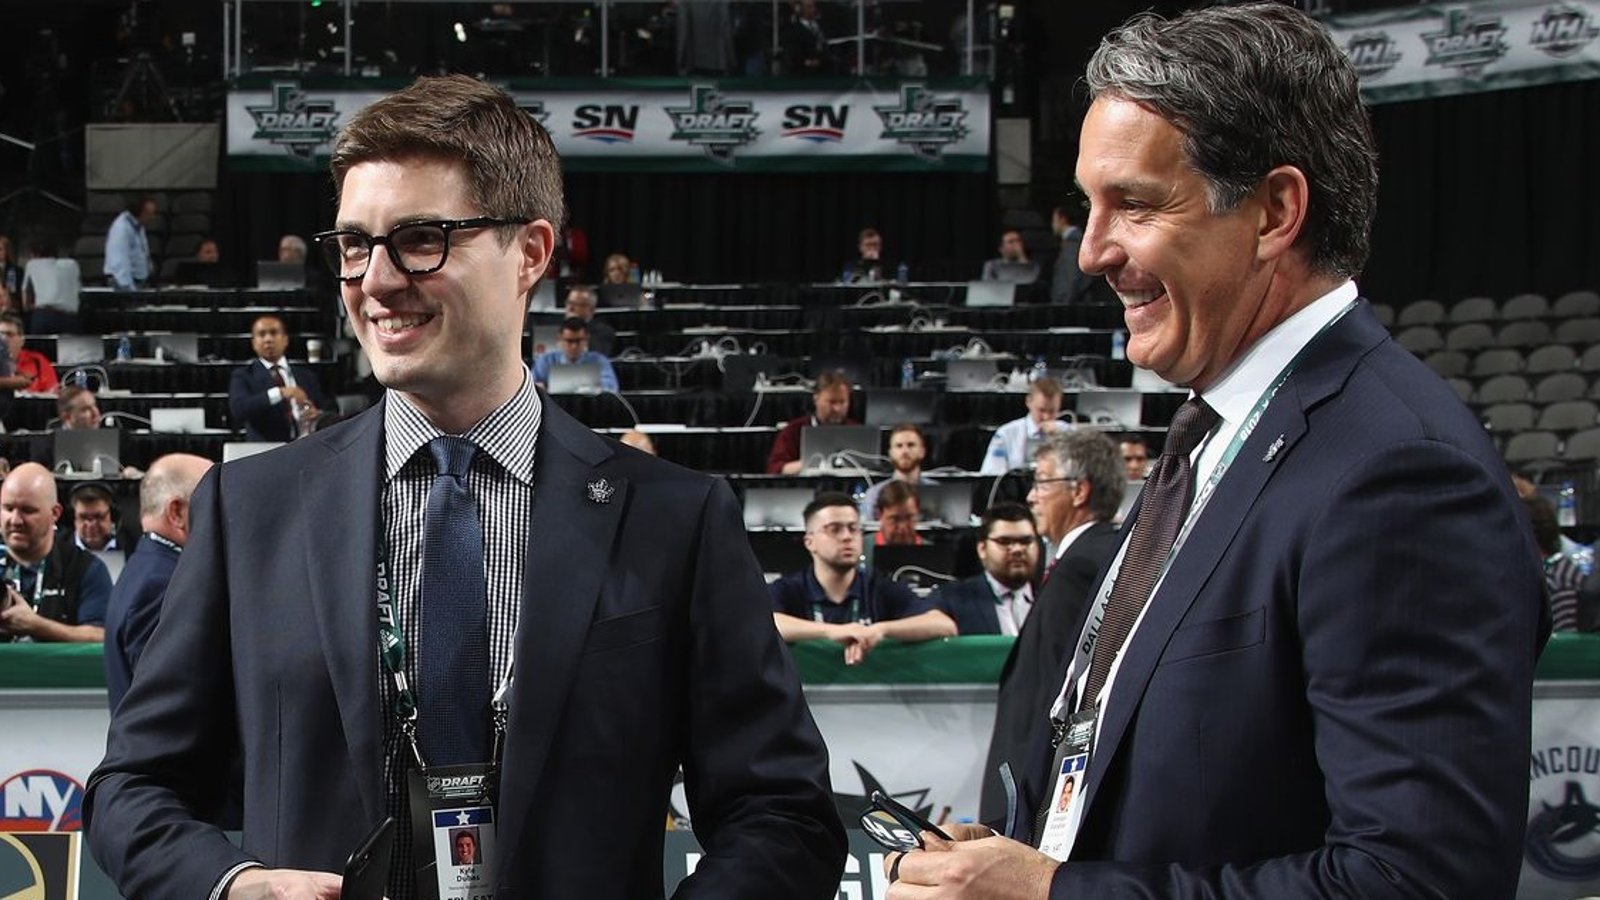 Kyle Dubas hints at a major change in philosophy for the Leafs.